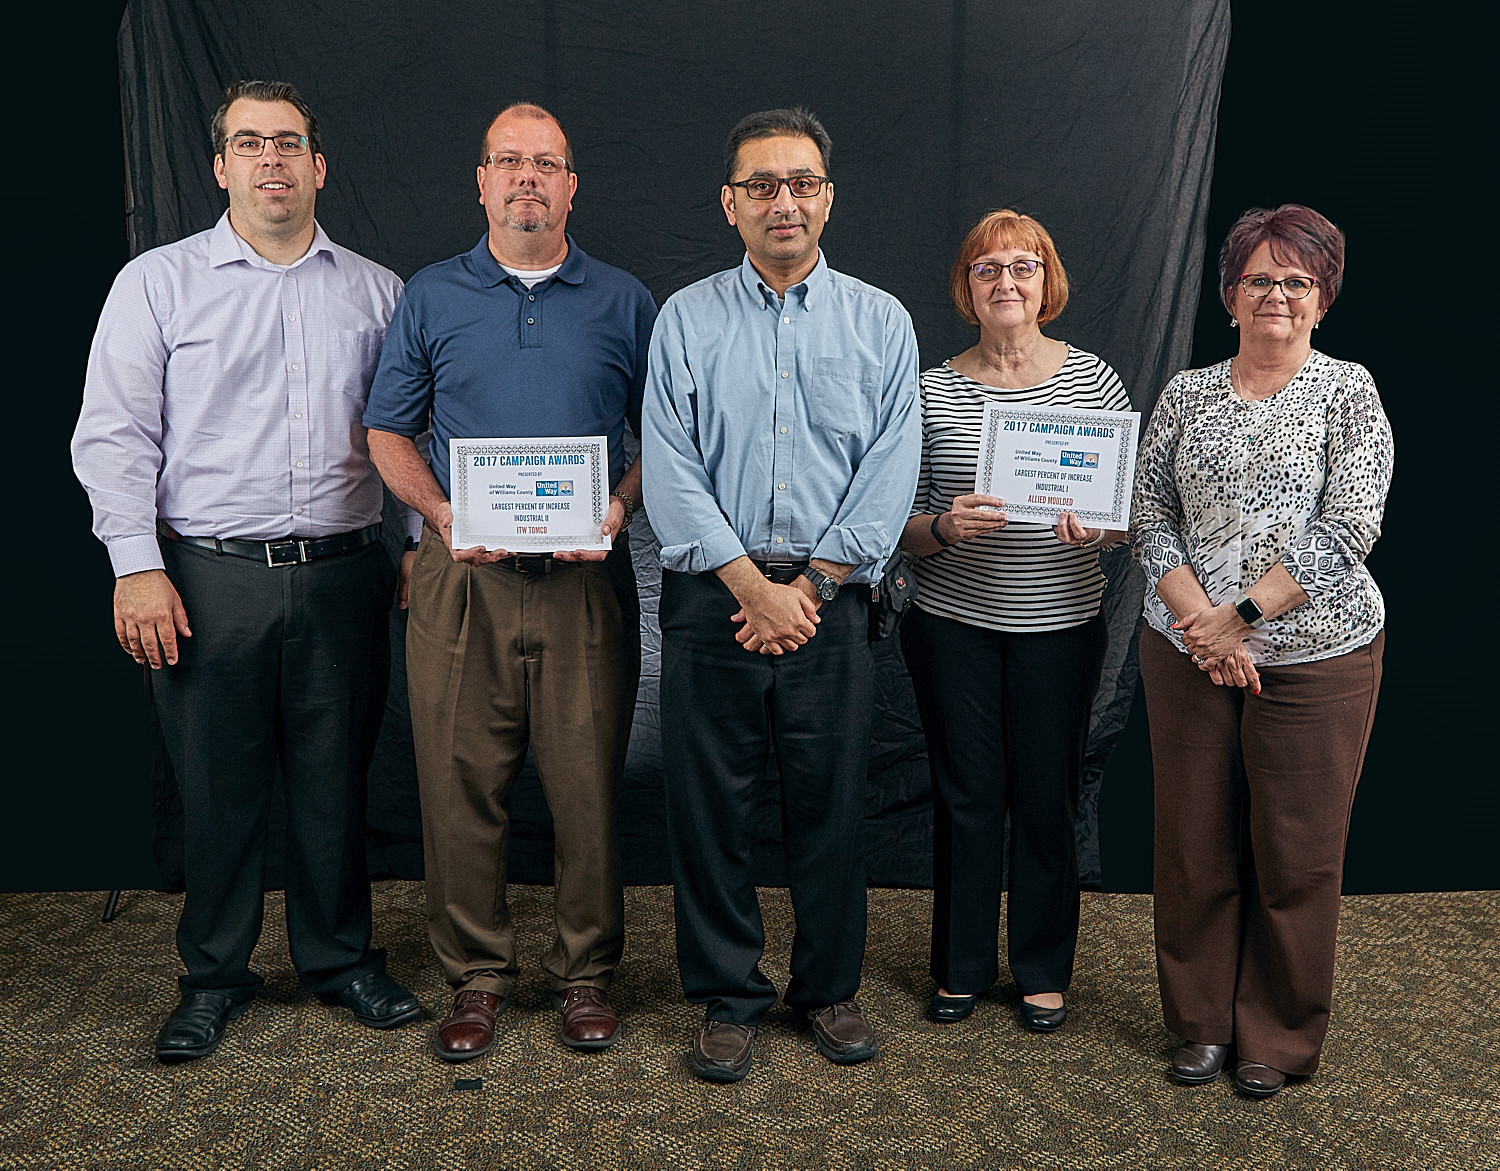 LARGEST PERCENT OF INCREASE Industrial II: Micah Frankenfield, Pat Crow, & Mahran Ayrton for ITW Tomco Industrial I: Deb Gordon & Cindy Parsons for Allied Moulded